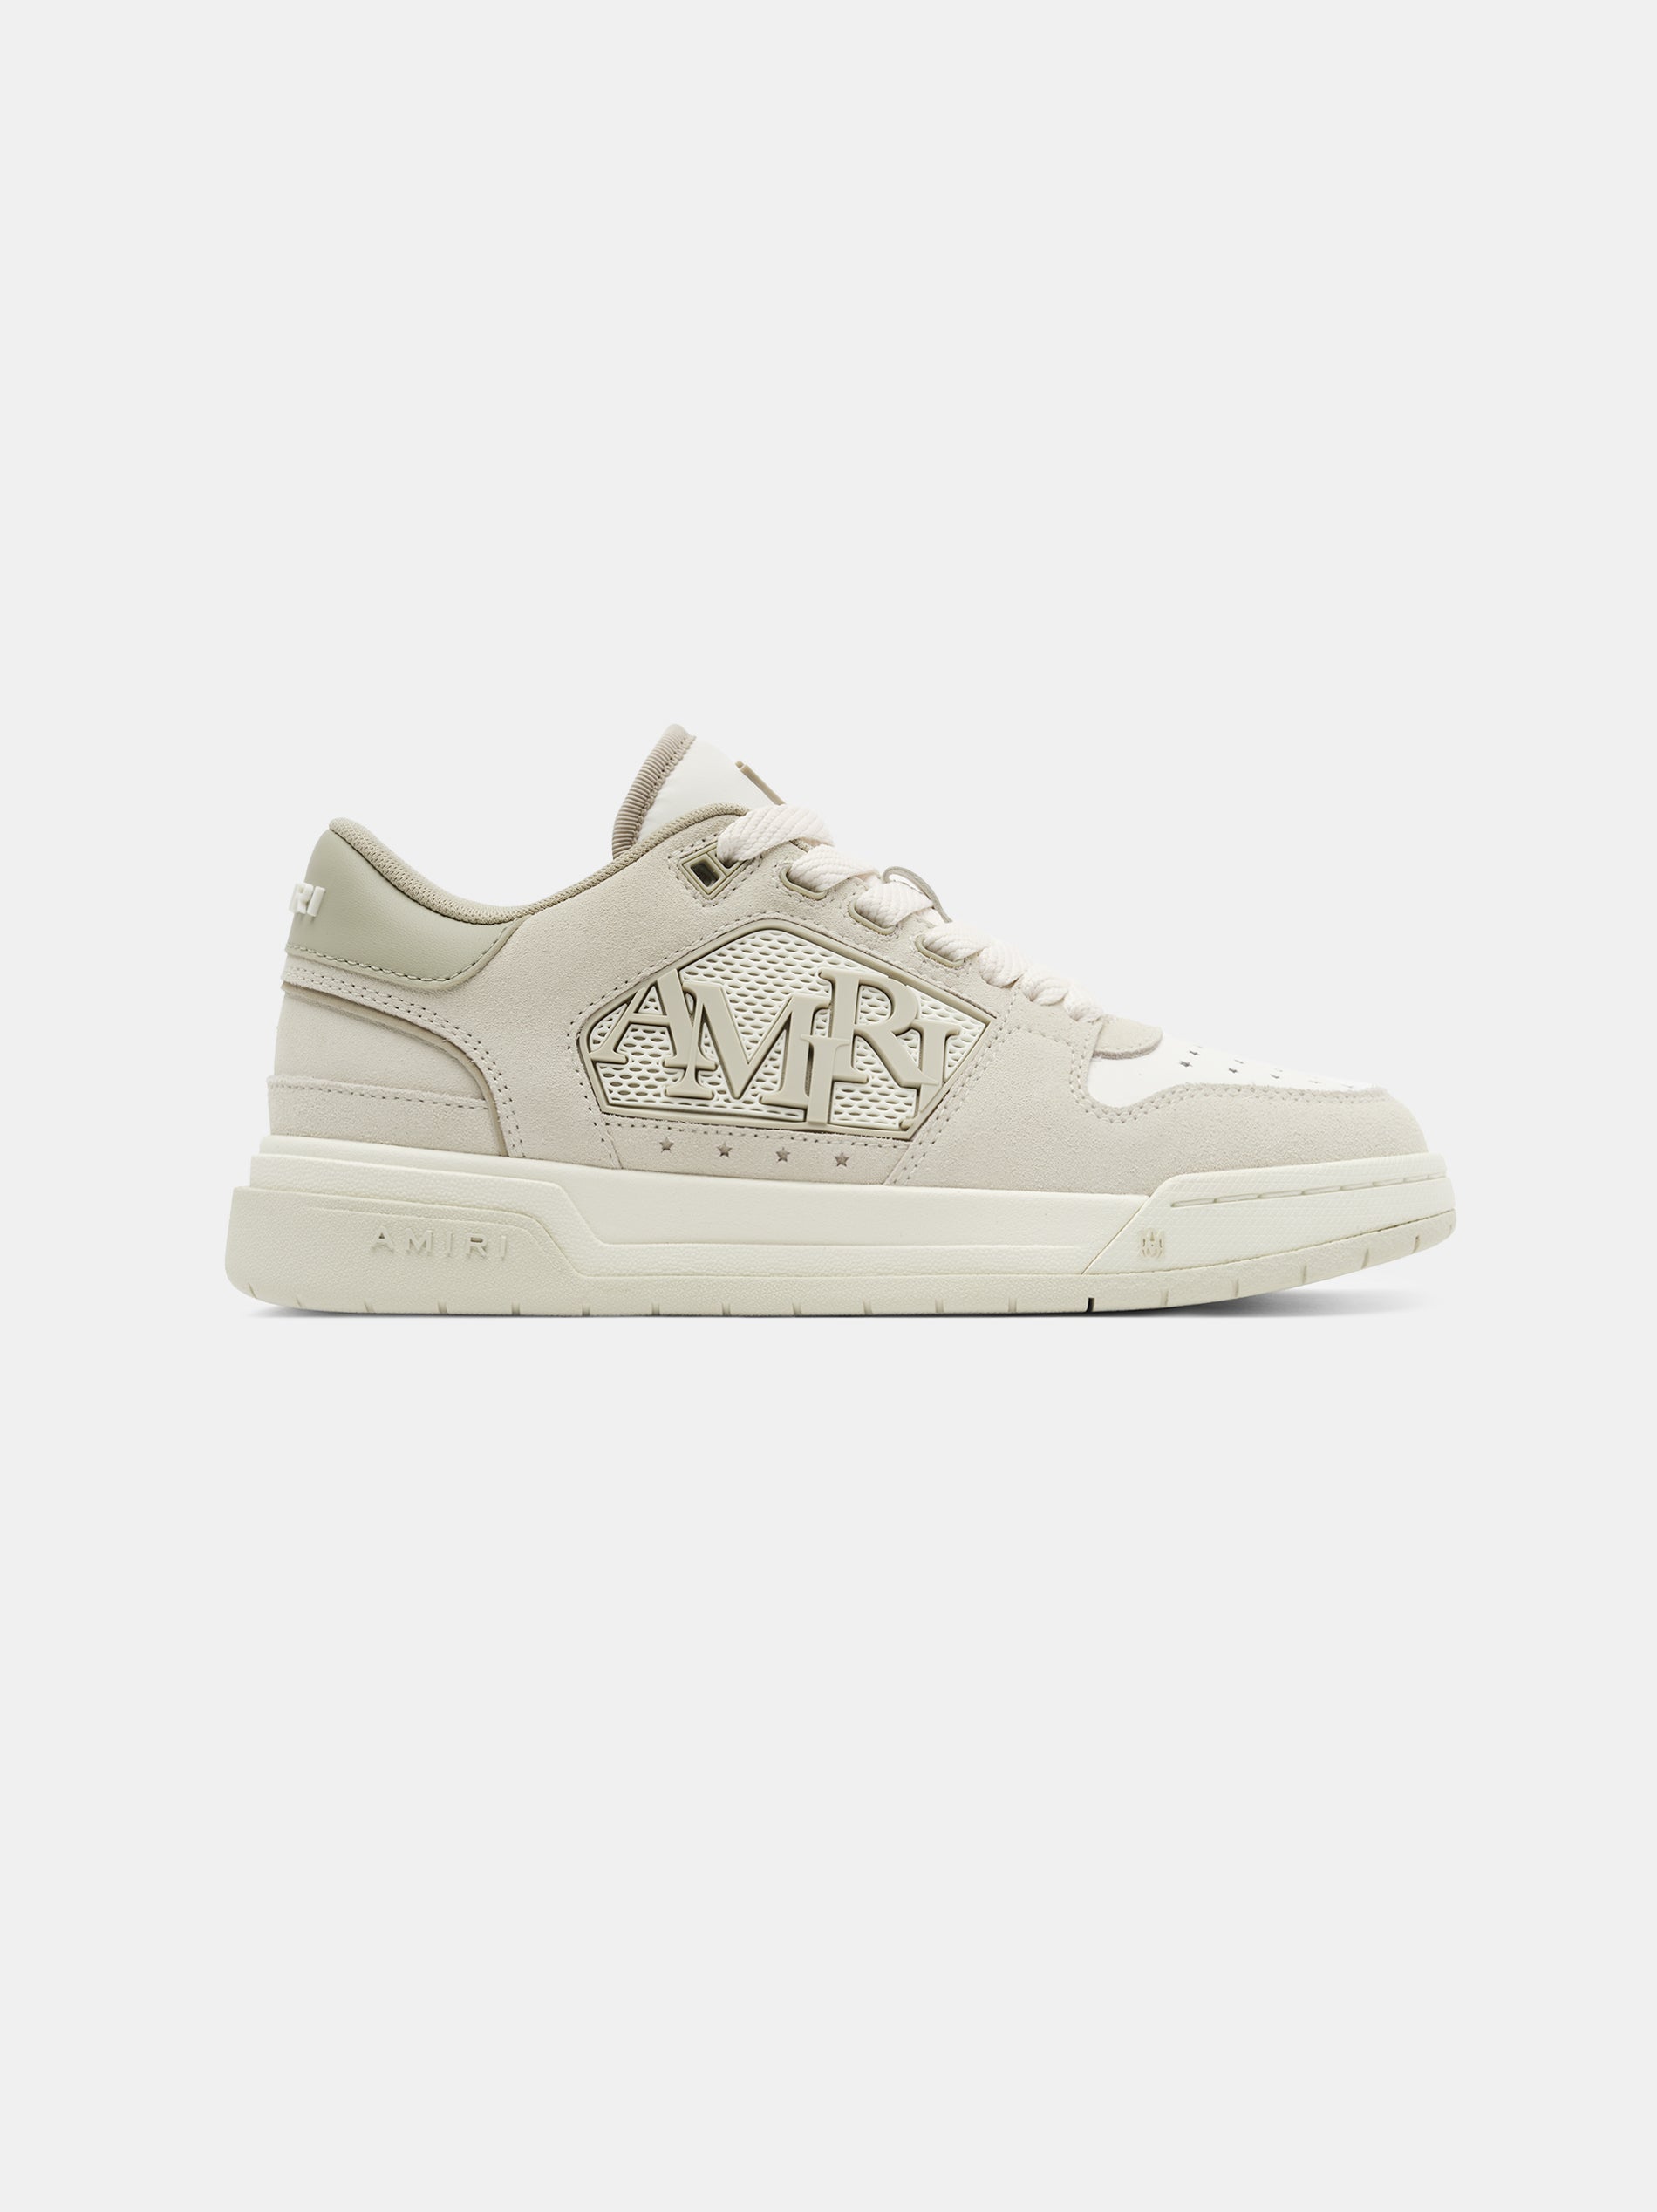 Product WOMEN - WOMEN'S SUEDE CLASSIC LOW - Birch featured image